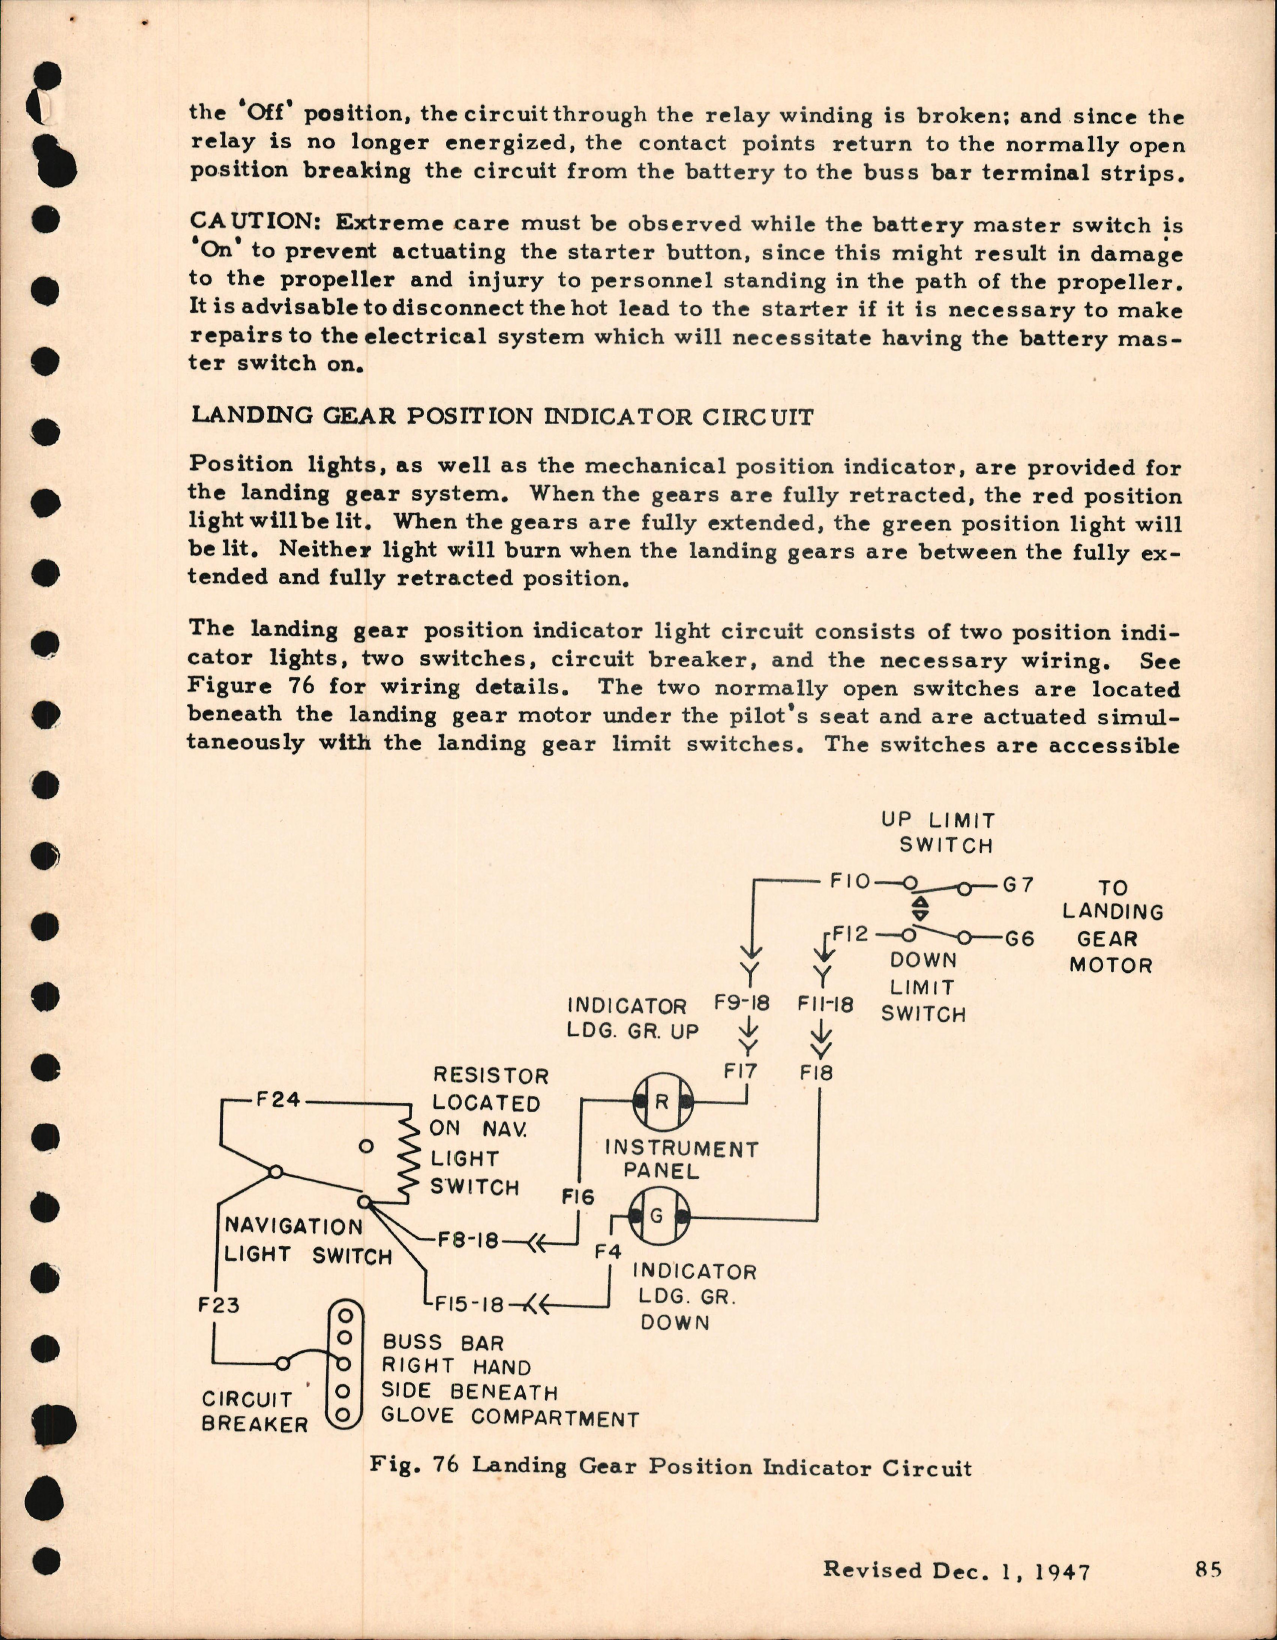 Sample page 5 from AirCorps Library document: Electrical System for the Beechcraft Bonanza